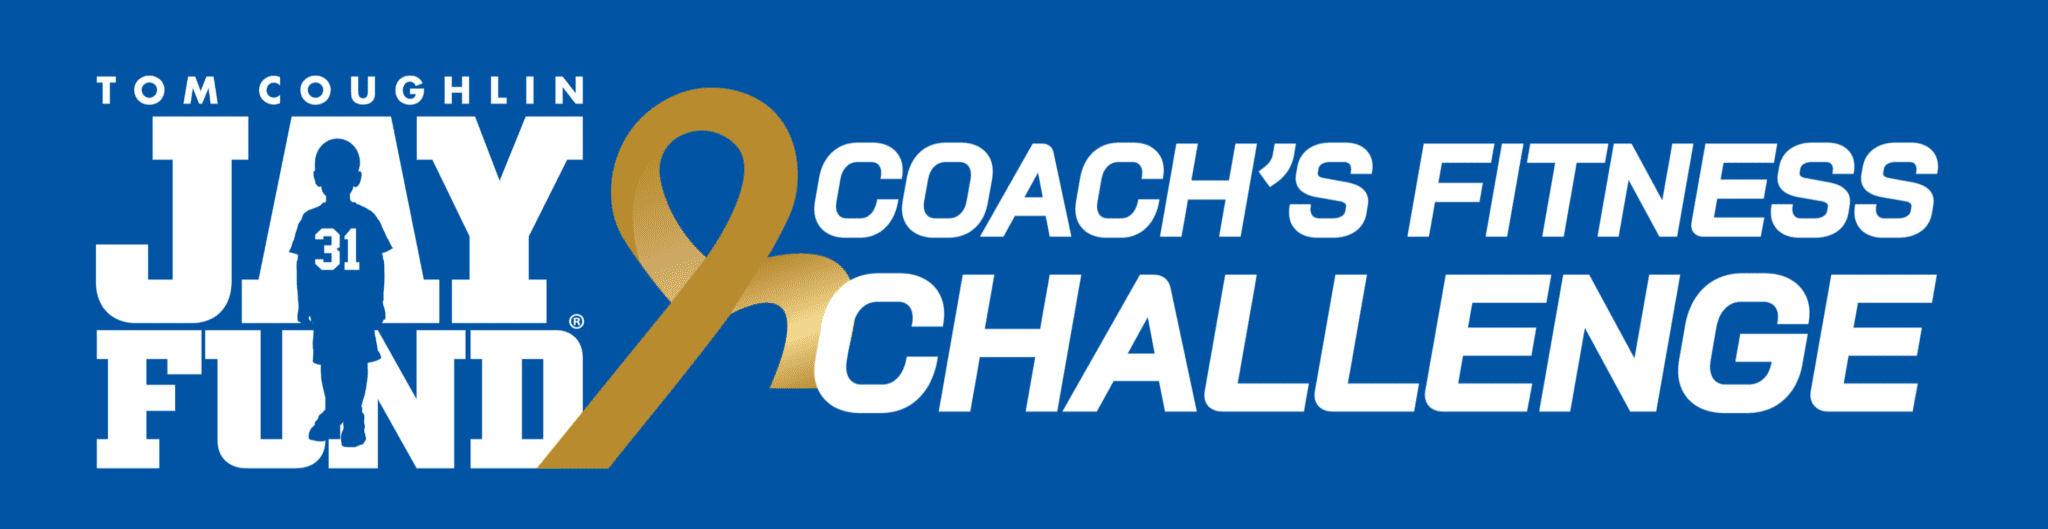 Coach's Fitness Challenge cropped logo